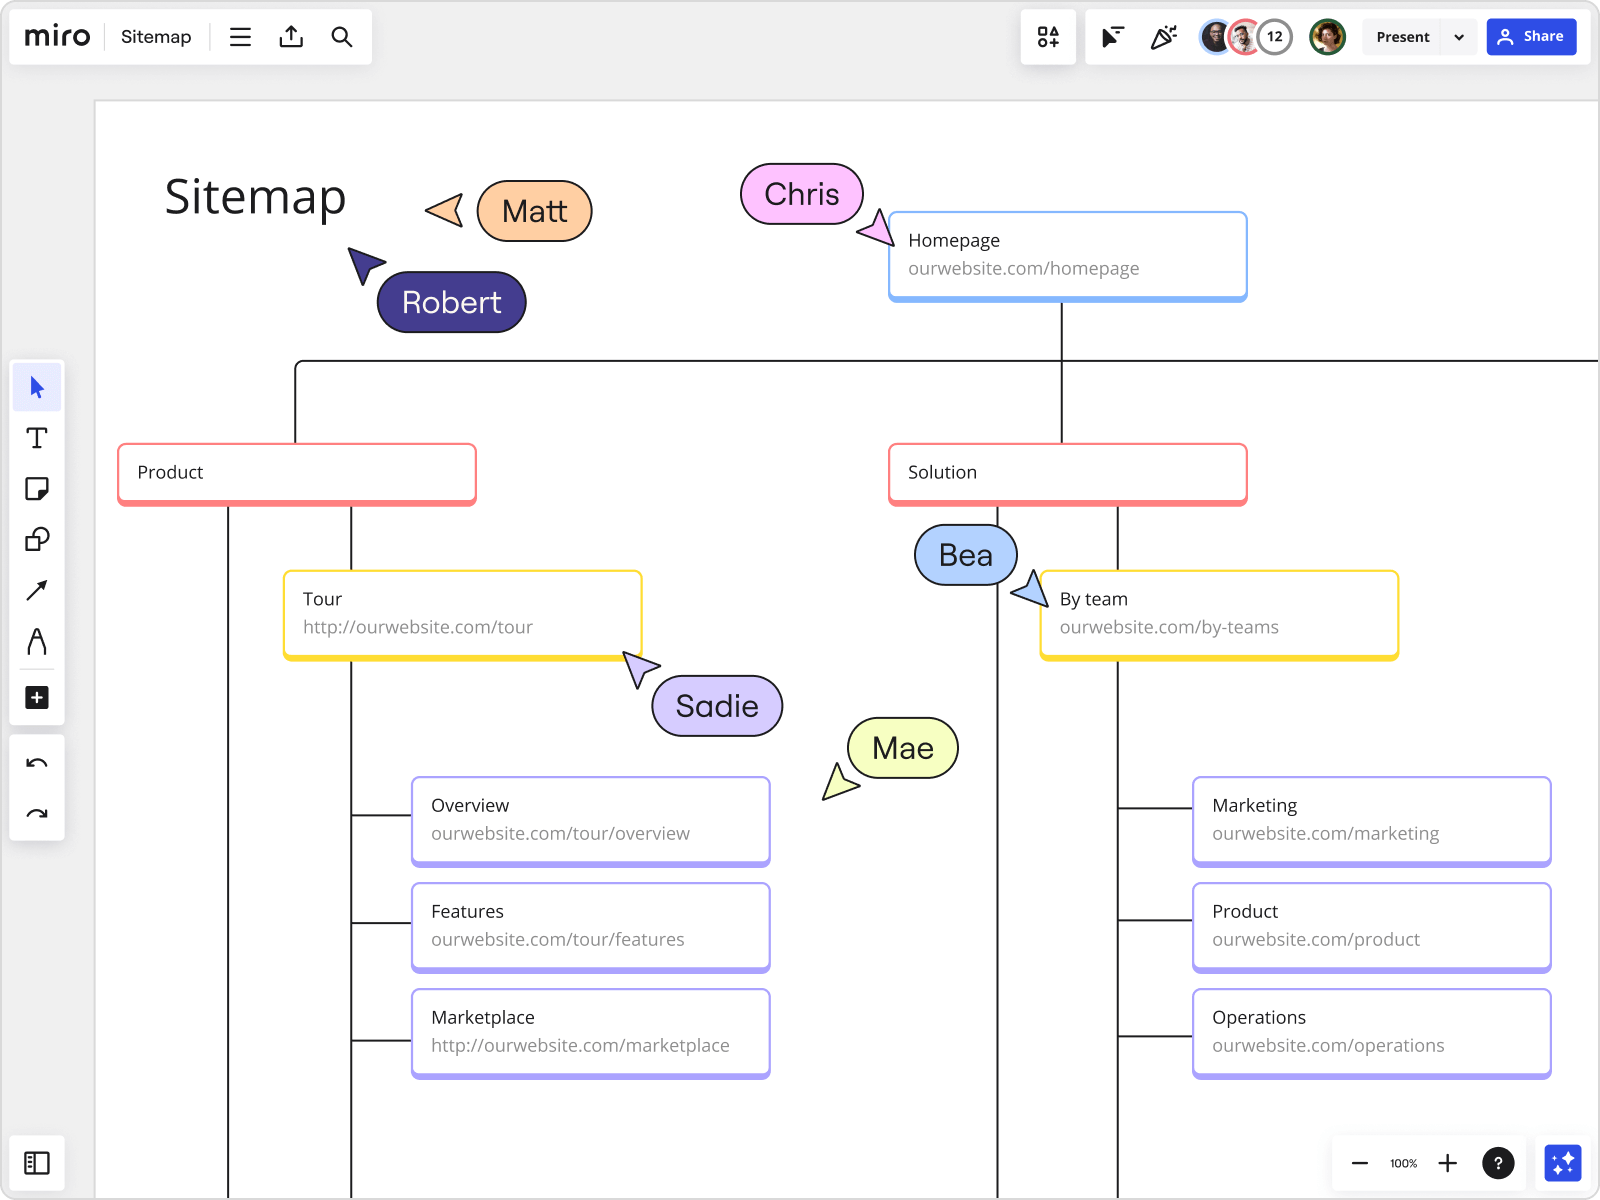 An image of a sitemap made in Miro